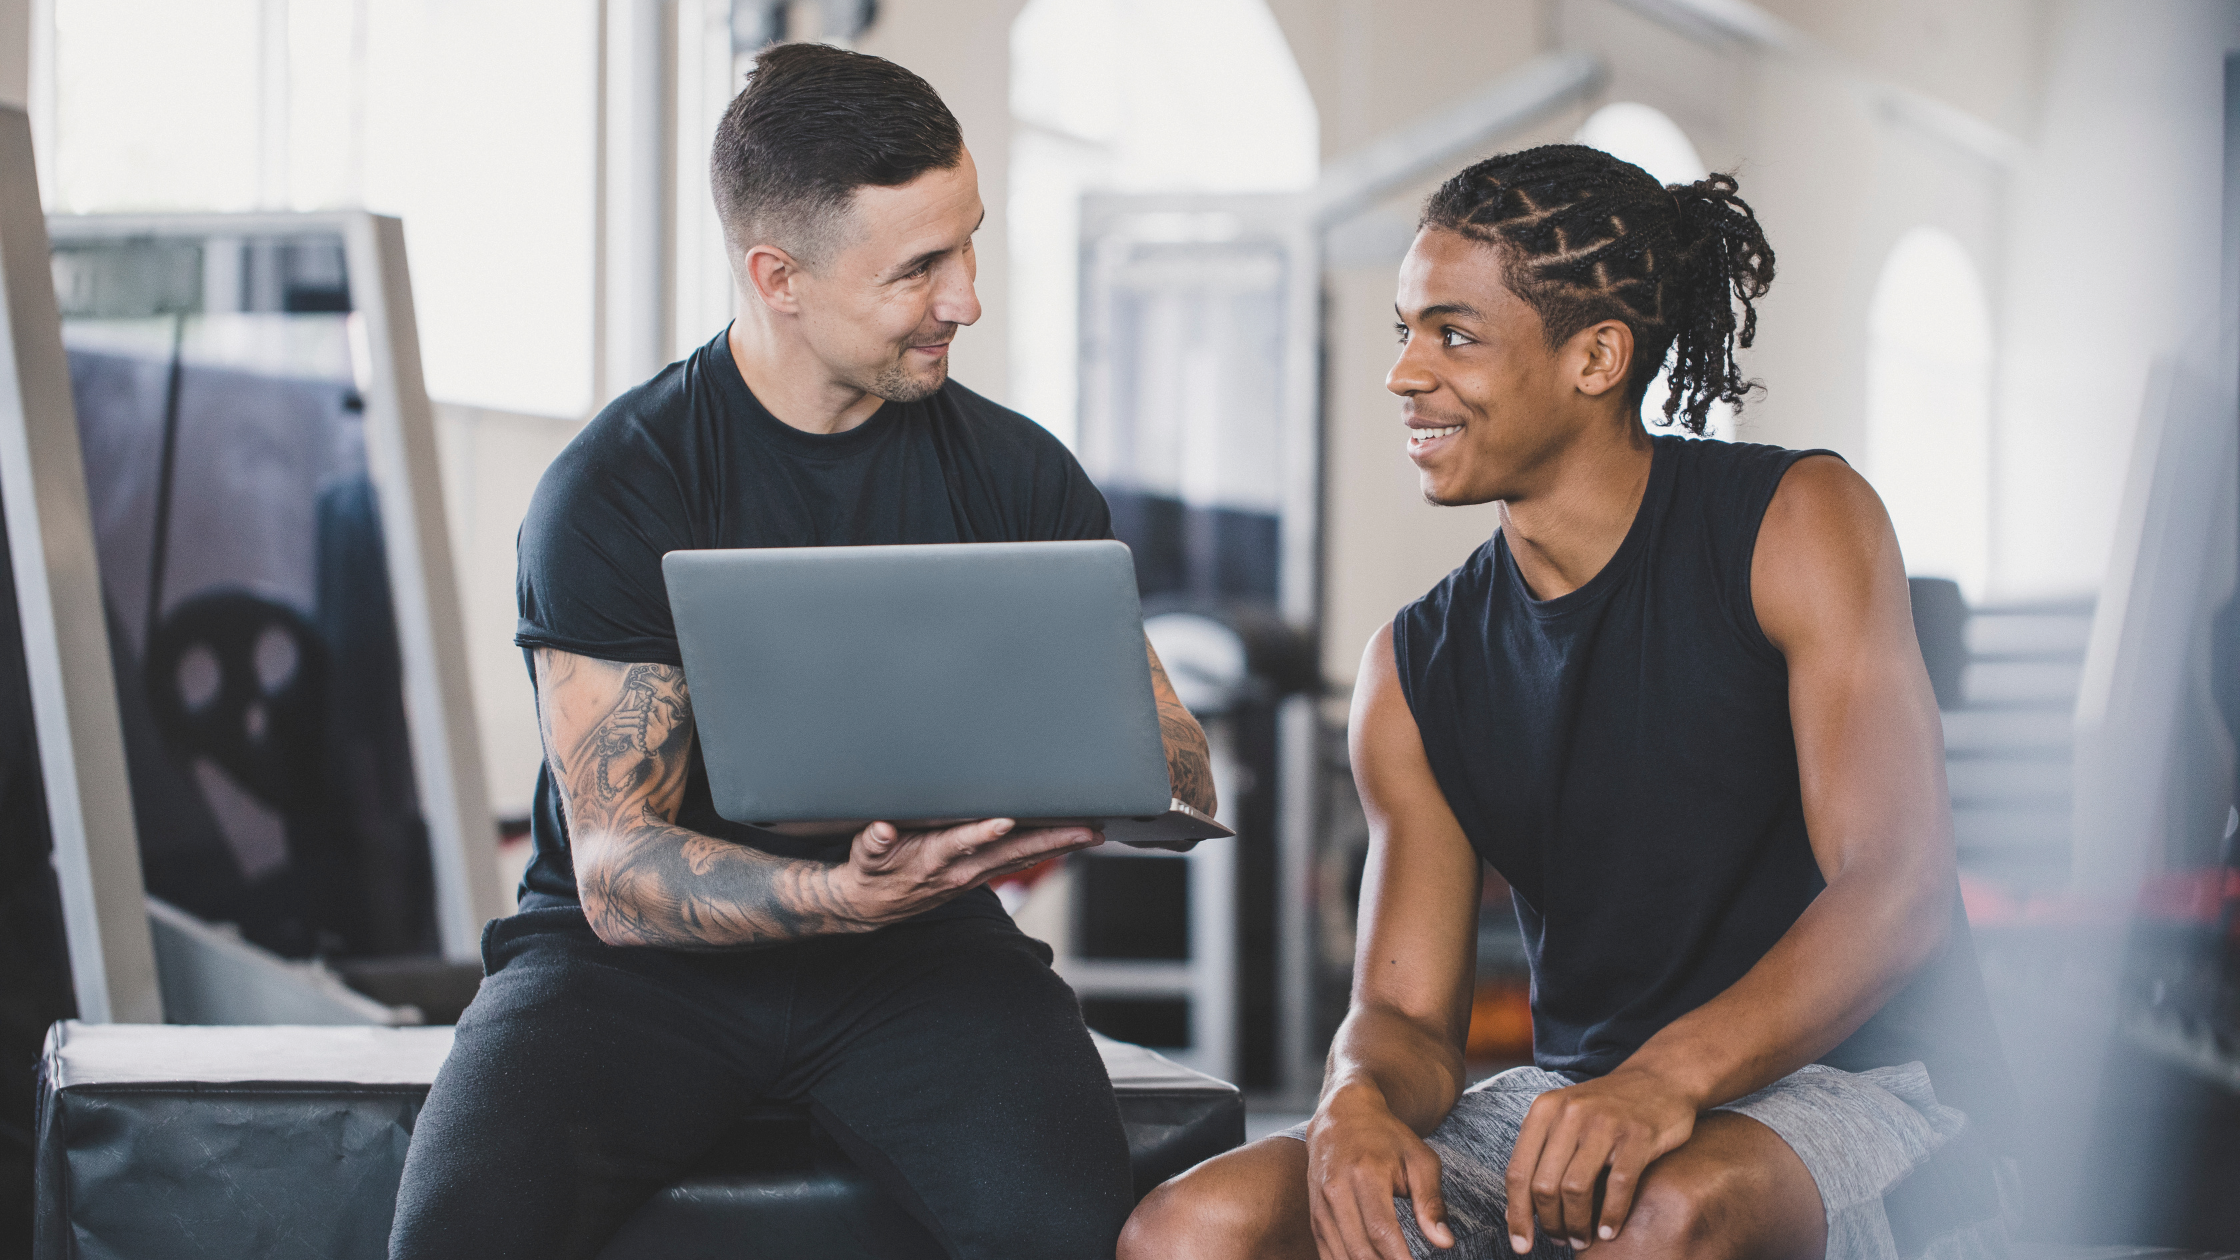 Is Your Personal Training Business Website Well Optimized for Google?